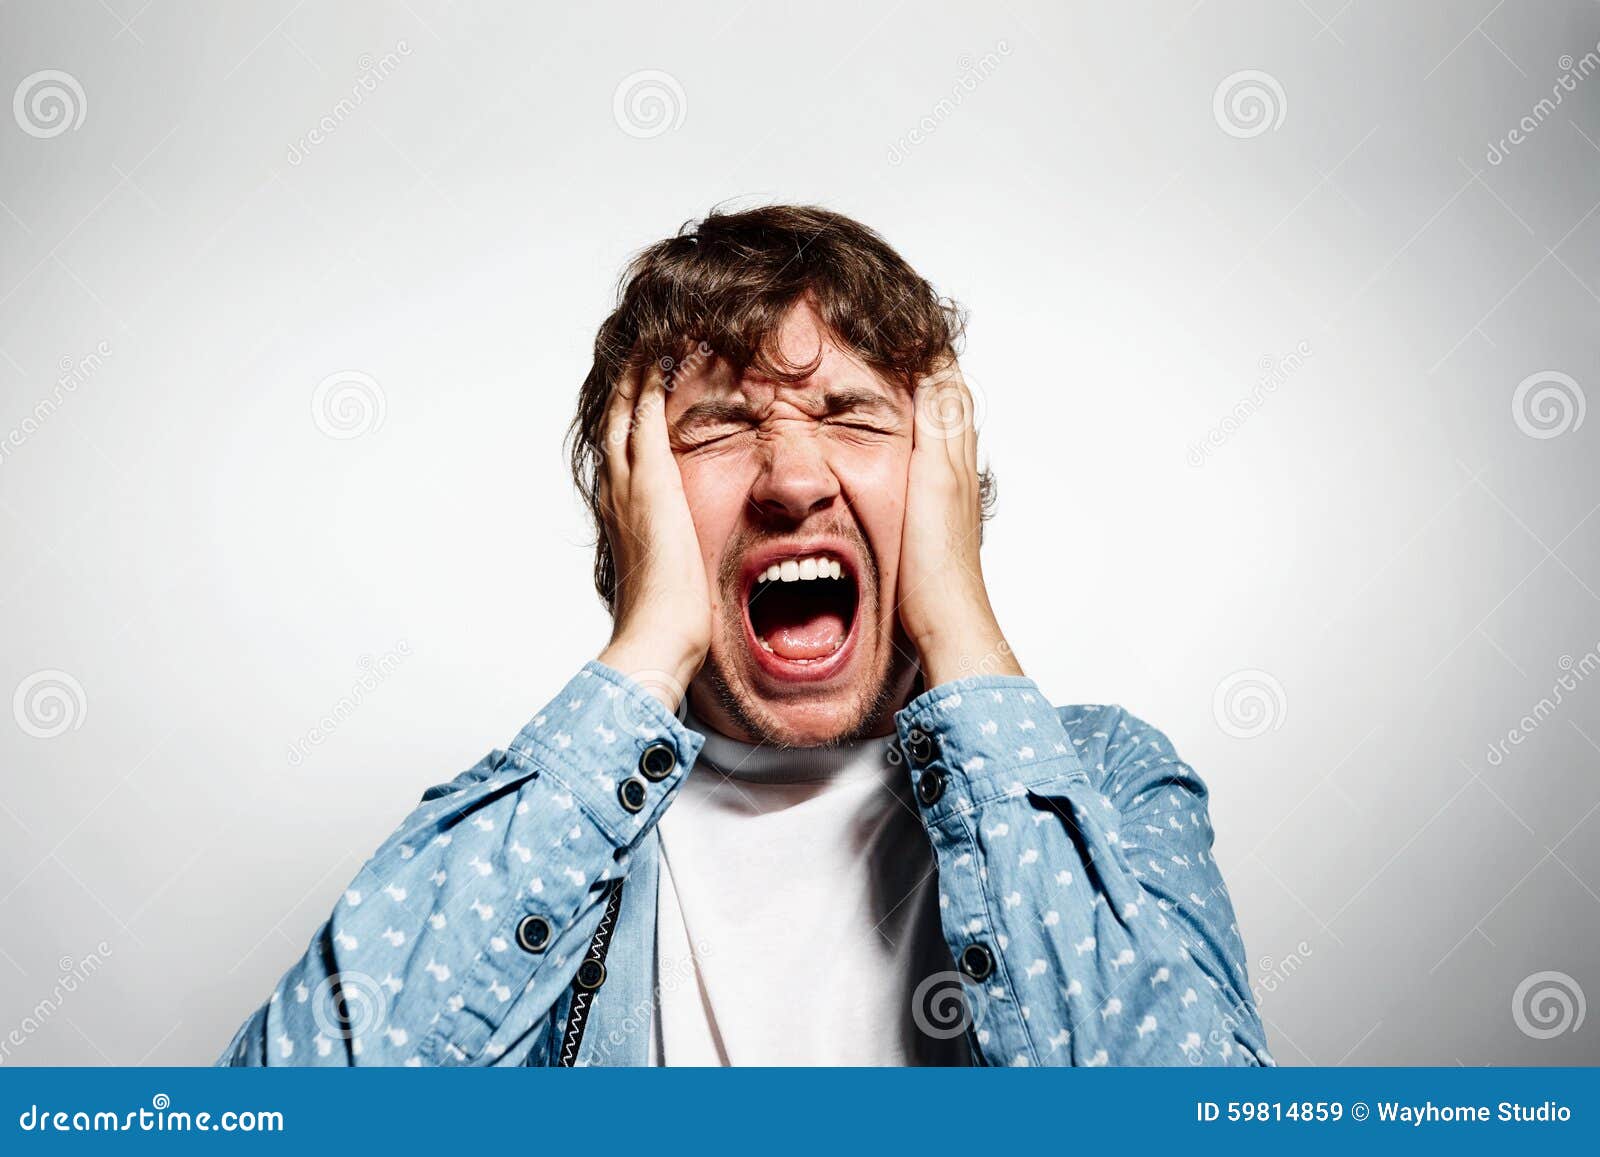 Closeup Portrait Upset Stressed Young Man Stock Image - Image of ...